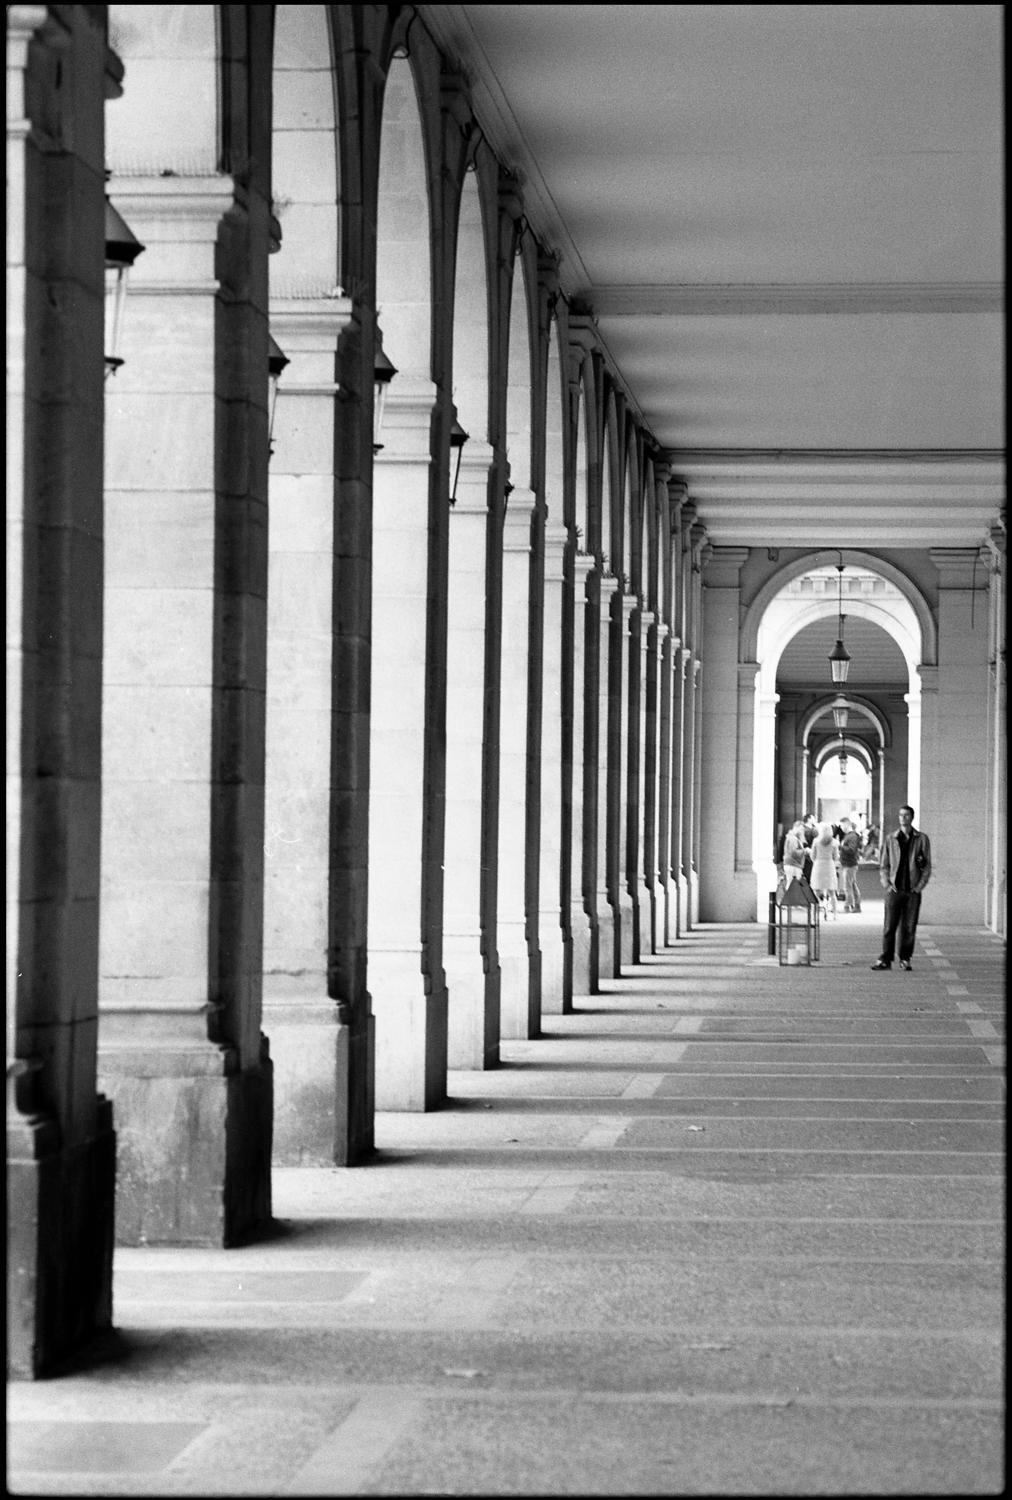 Paul Cooklin Black and White Photograph - Edition 2/10 - Arches, Barcelona, Spain, Silver Gelatin Photograph